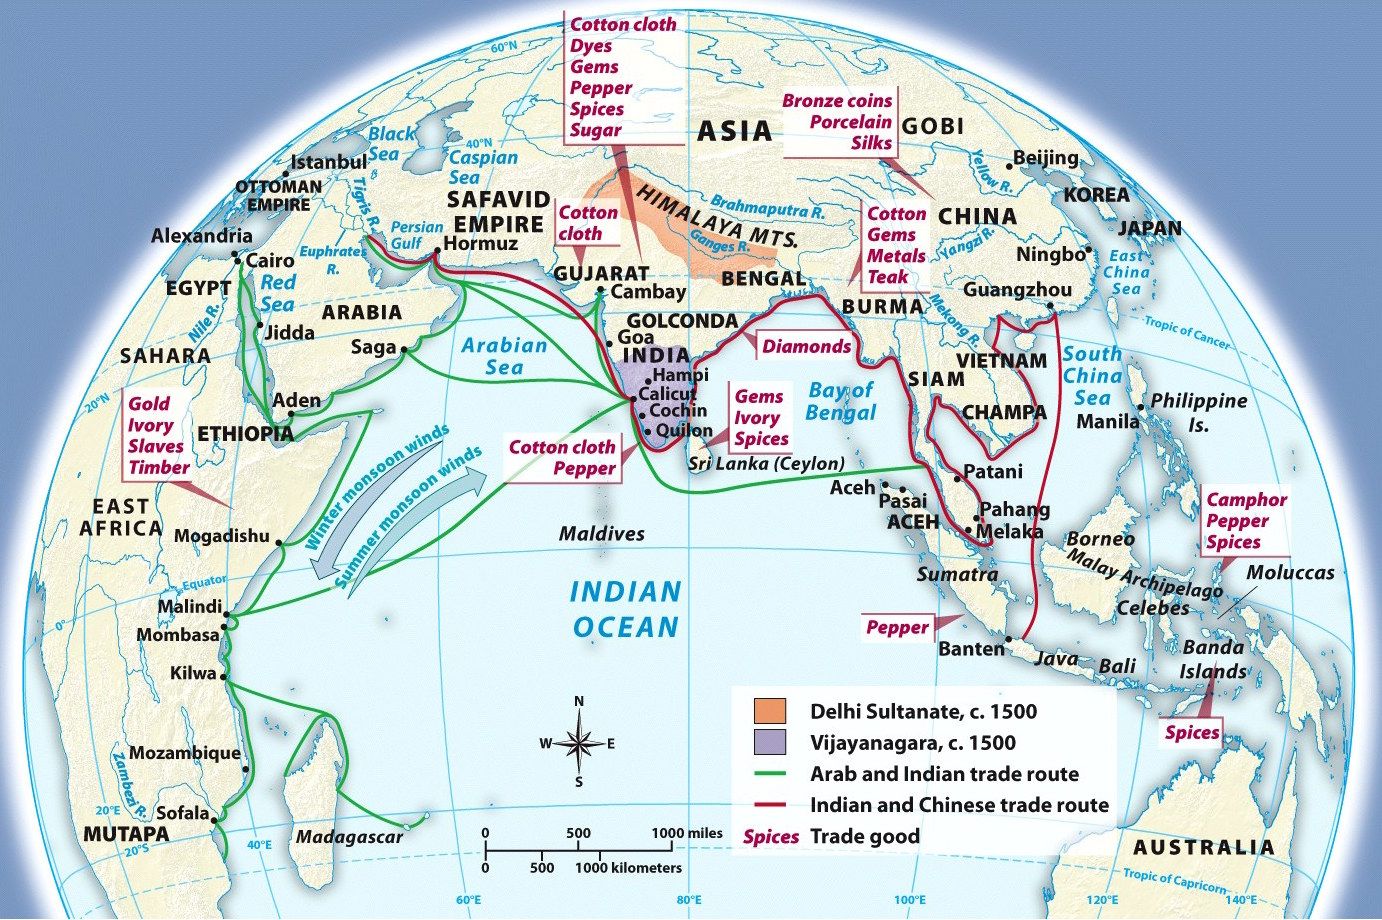 The Indian Ocean around 1500. Source: A History of World Societies